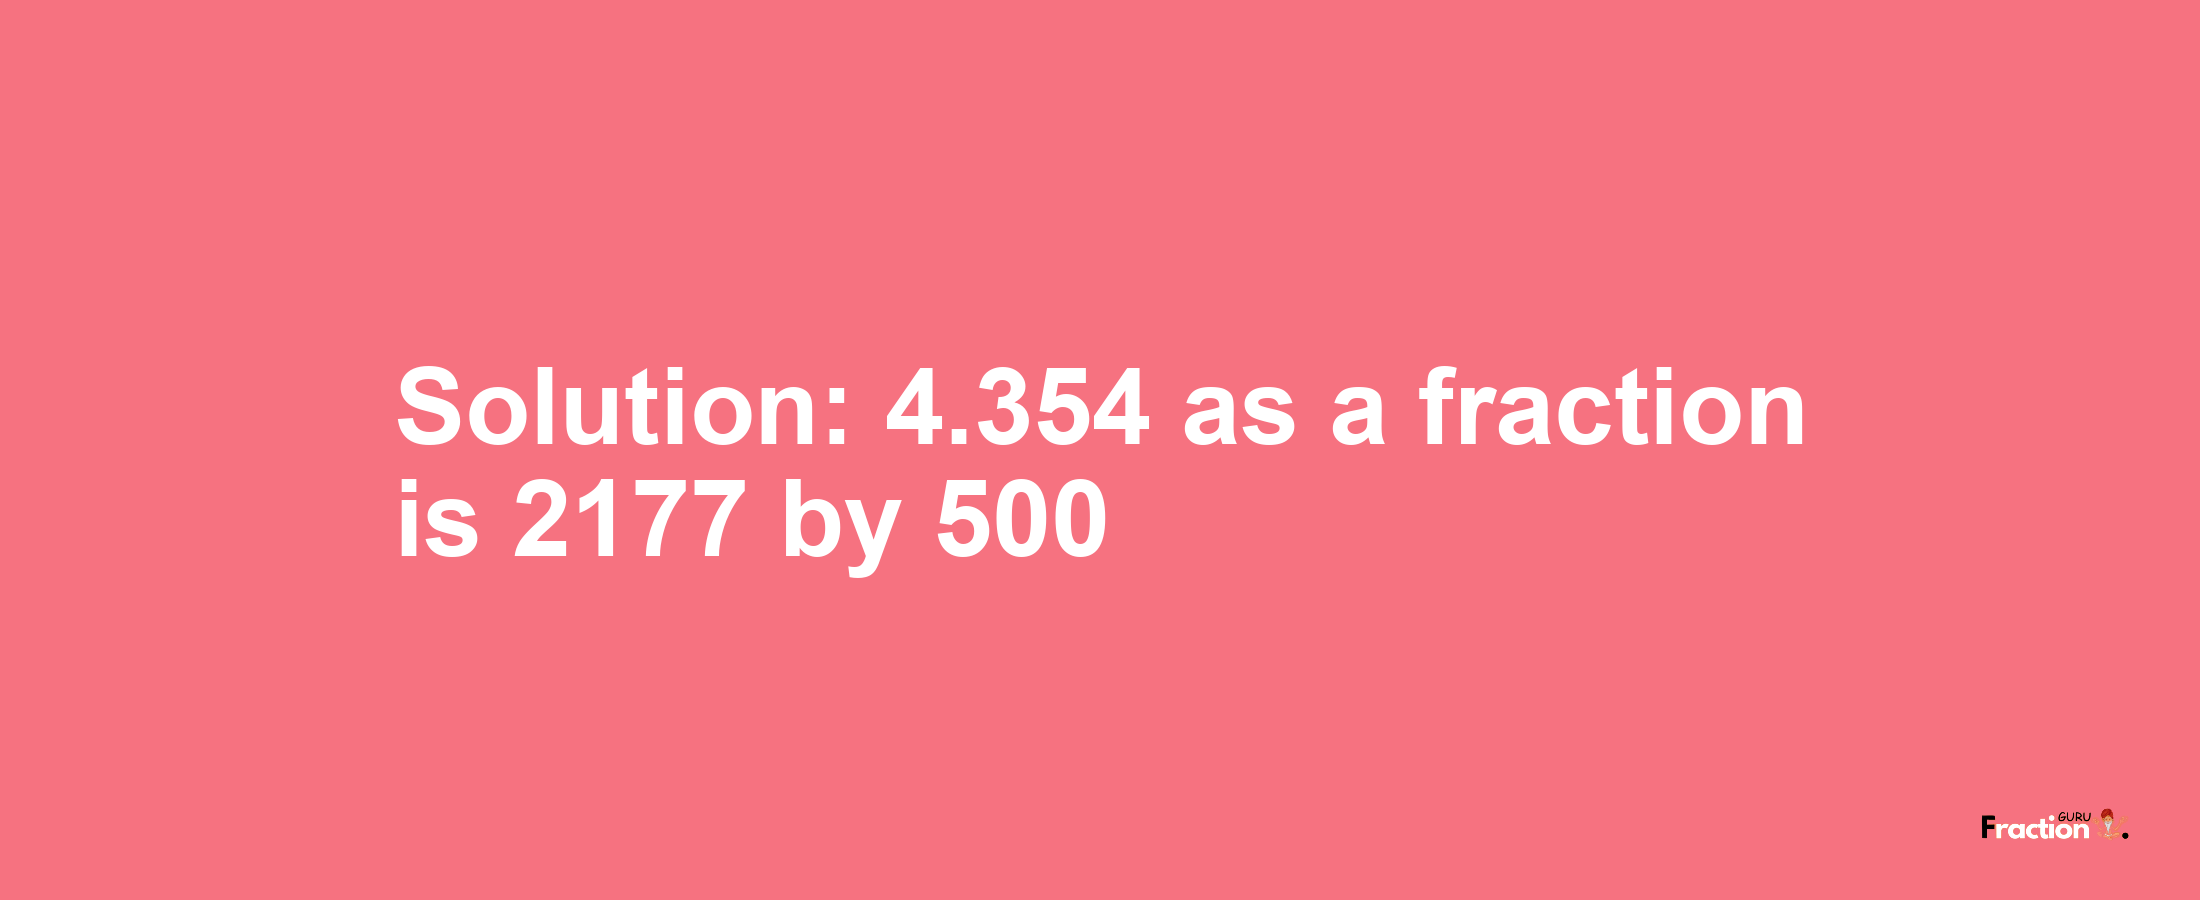 Solution:4.354 as a fraction is 2177/500